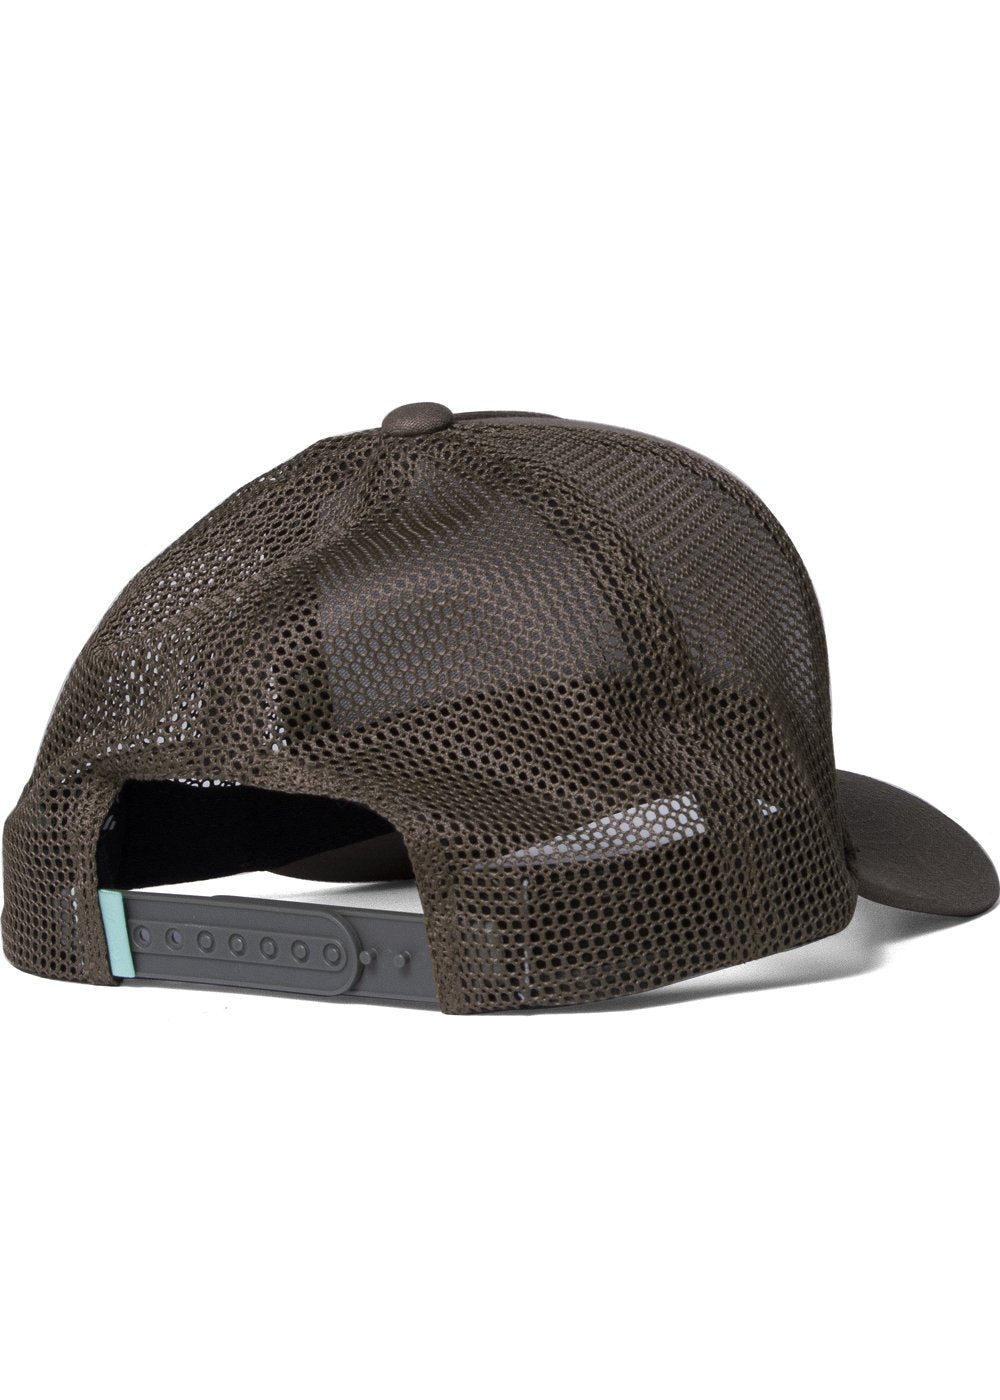 Trip Out Eco Trucker Hat, KAN